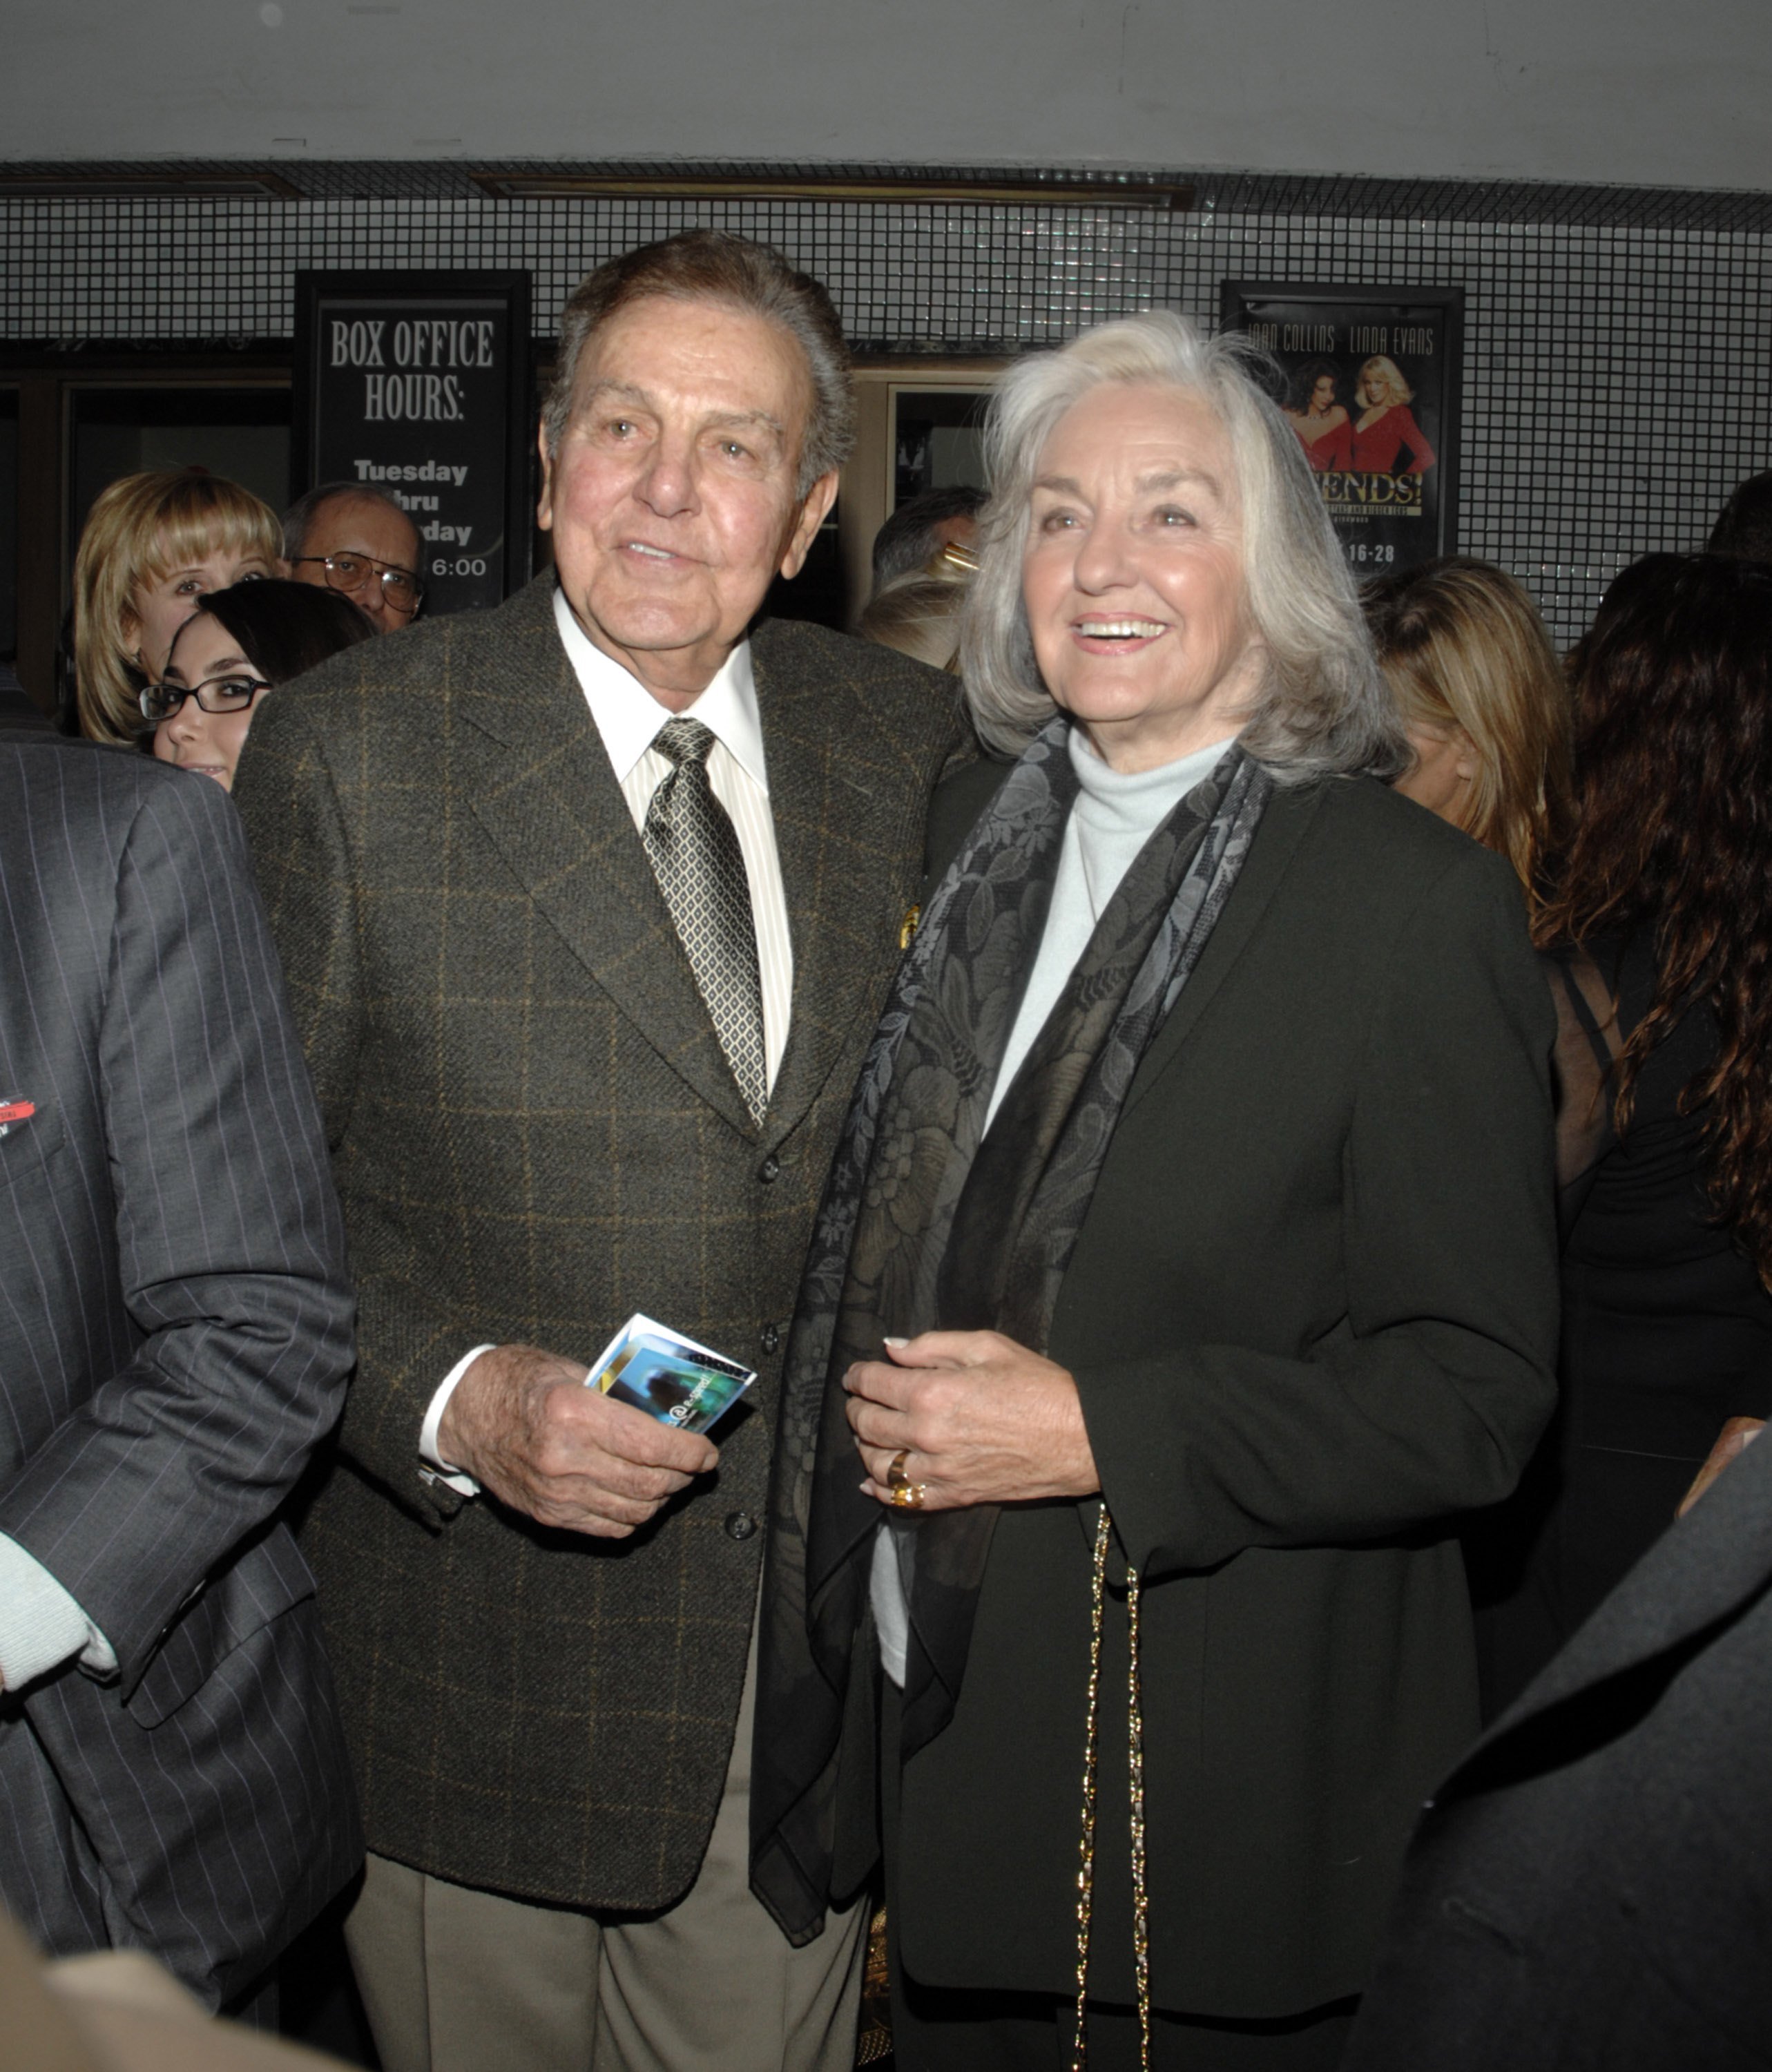 Mike Connors and Mary Lou Wiley attend Joan Collins and Linda Evans' premiere performance in "Legends" on January 16, 2007 at the Wlishire Theater in Beverly Hills, California.  |  Source: Getty Images